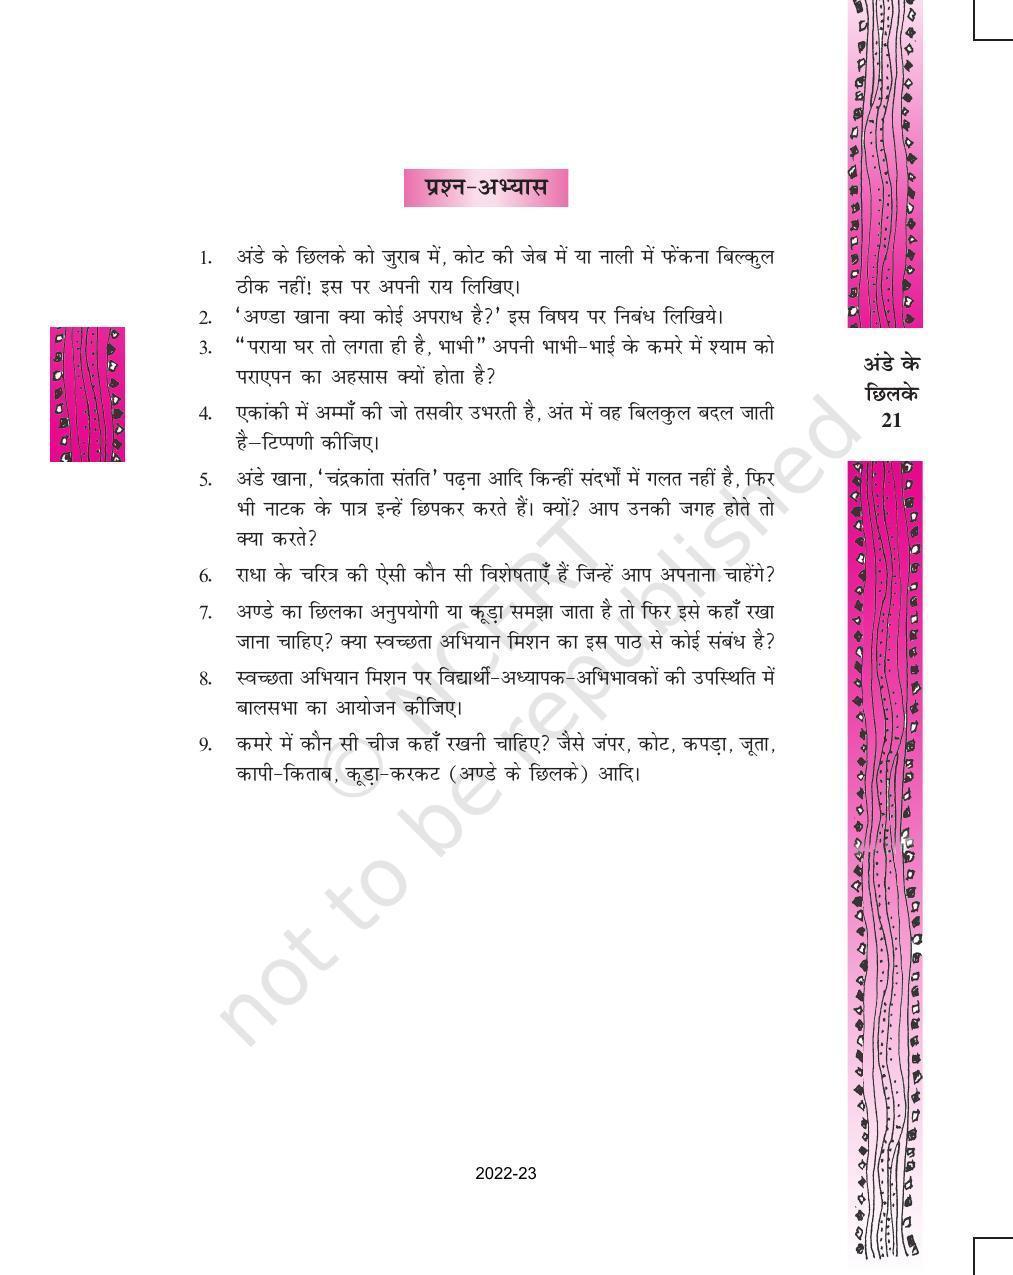 NCERT Book for Class 11 Hindi Antral Chapter 1 अंडे के छिलके - Page 21